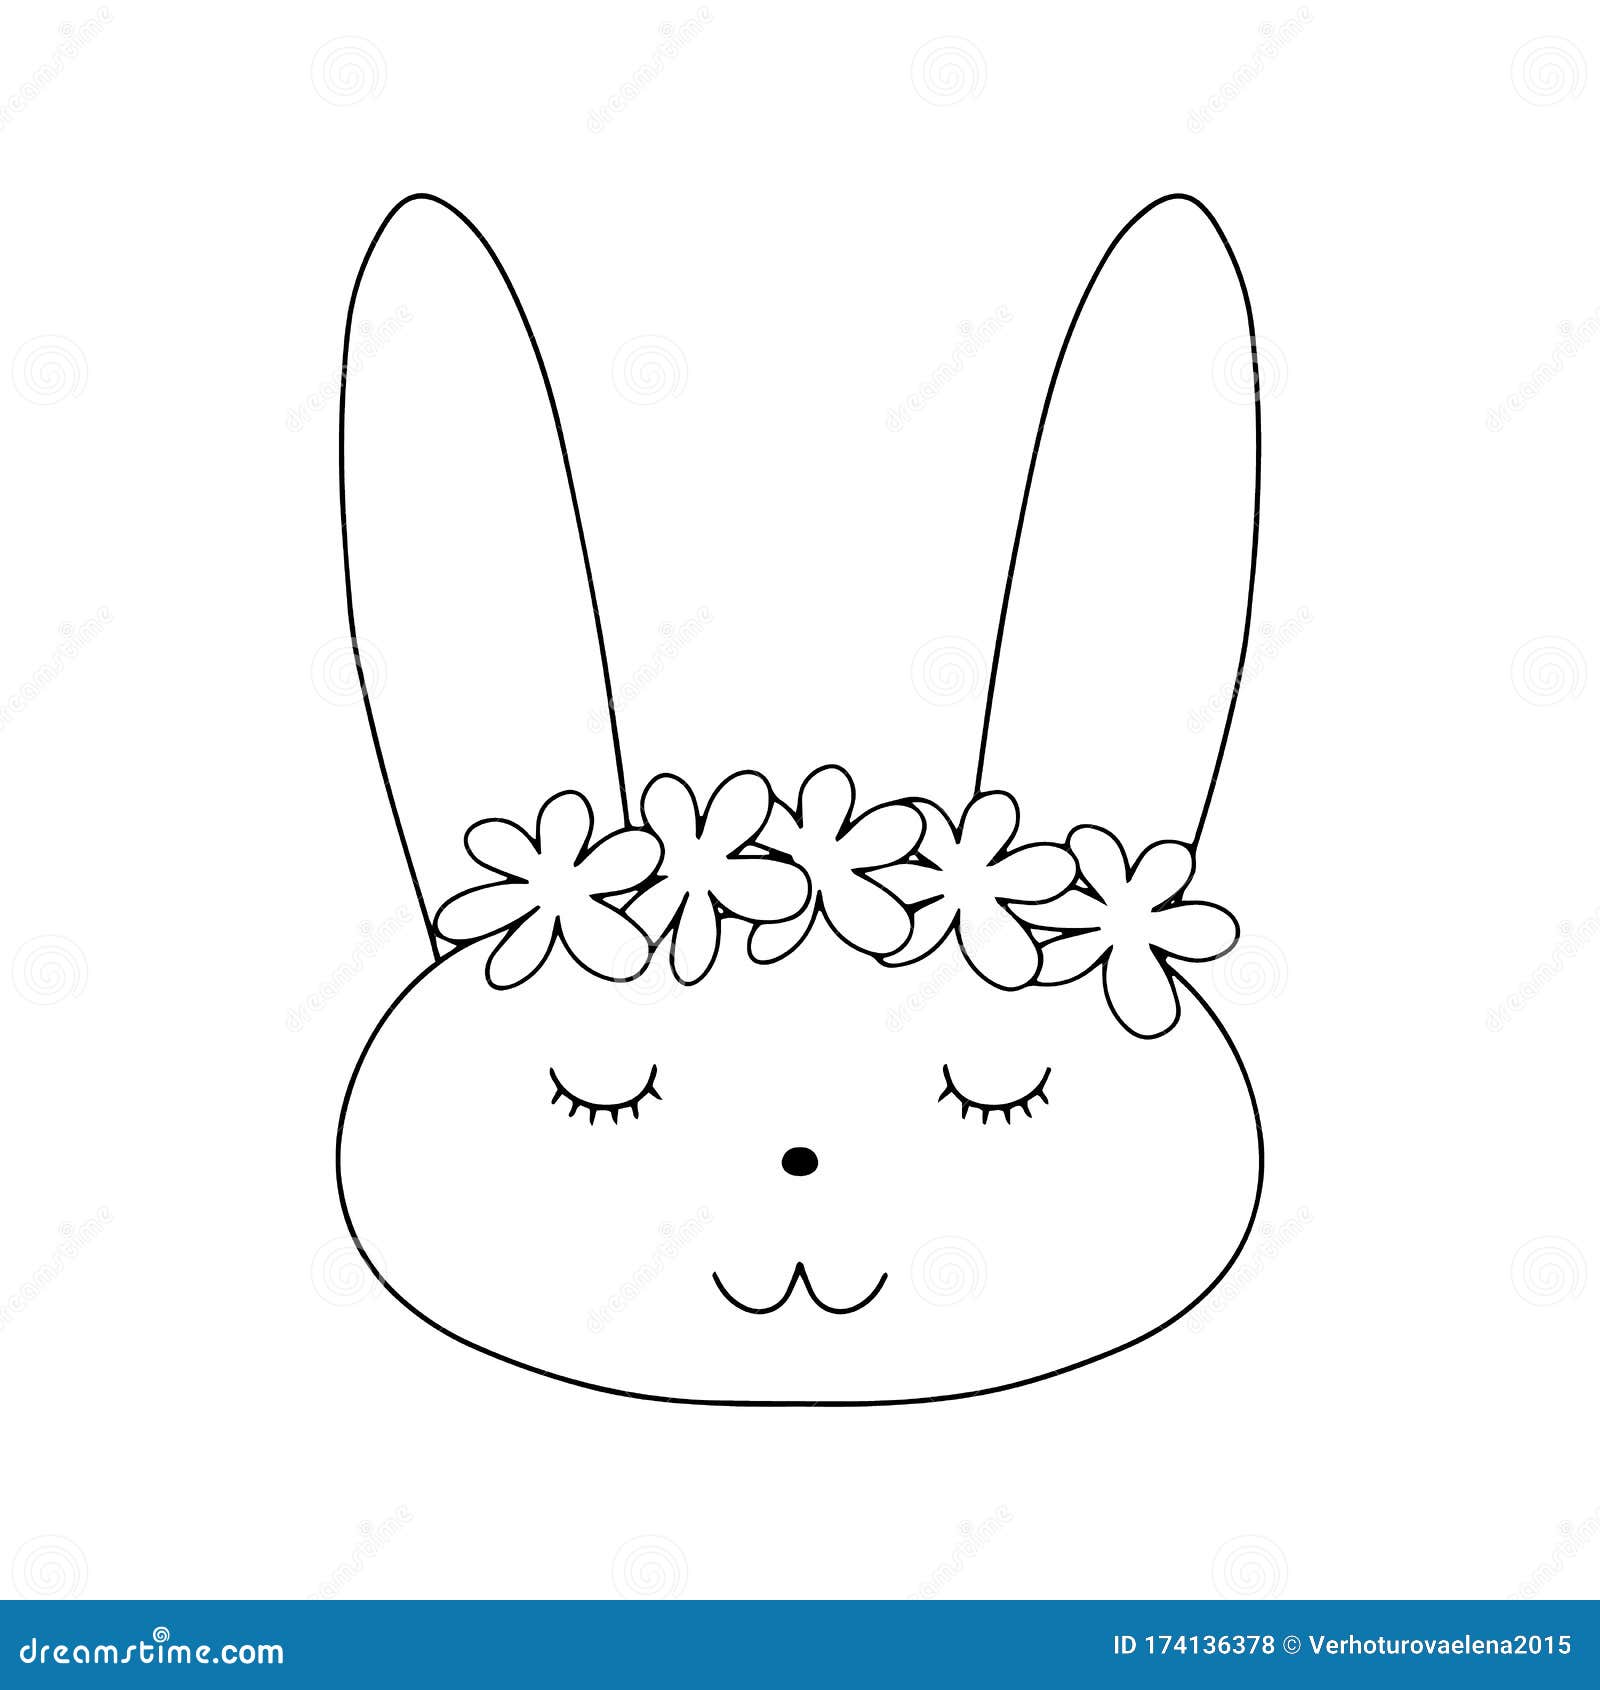 Download Outline Easter Bunny Coloring In Line Art Style With ...